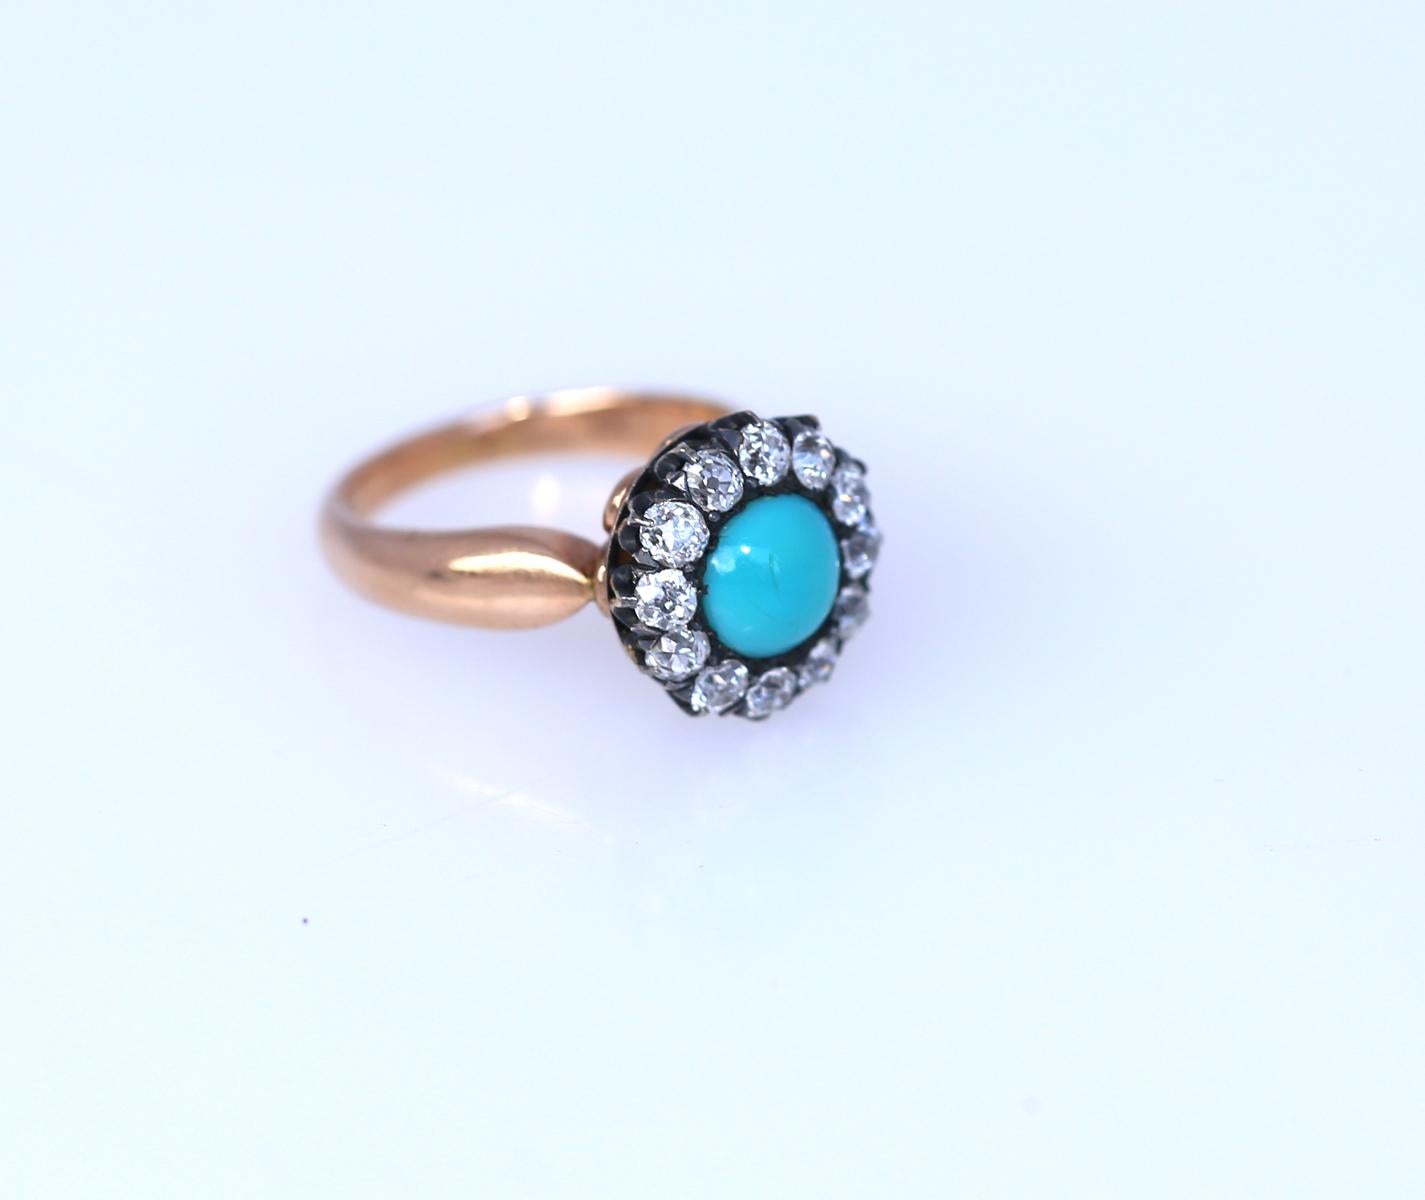 Diamond and Turquoise Ring that Transformers into the Brooch (Pin). Created in 1890.
Amazing Diamond Turquoise Ring Transformer Brooch. Transformer jewelry is among the most sought-after by jewelry collectors. This particular fine item is a ring